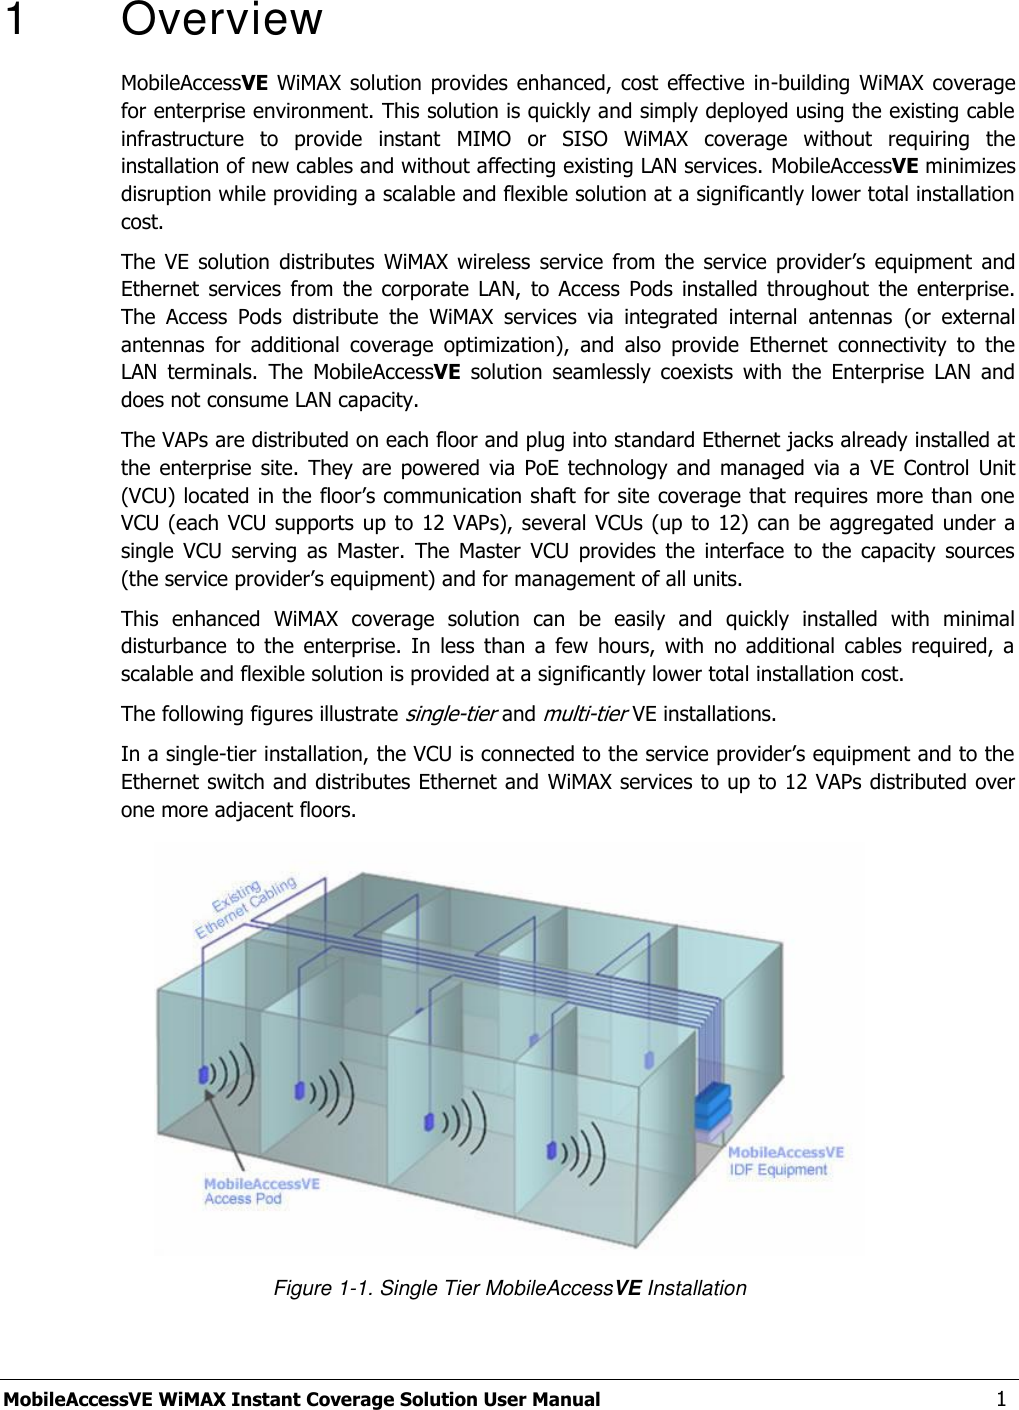  MobileAccessVE WiMAX Instant Coverage Solution User Manual   1 1   Overview MobileAccessVE WiMAX  solution provides  enhanced,  cost  effective  in-building  WiMAX  coverage for enterprise environment. This solution is quickly and simply deployed using the existing cable infrastructure  to  provide  instant  MIMO  or  SISO  WiMAX  coverage  without  requiring  the installation of new cables and without affecting existing LAN services. MobileAccessVE minimizes disruption while providing a scalable and flexible solution at a significantly lower total installation cost. The  VE  solution  distributes  WiMAX  wireless  service  from  the  service  provider‟s  equipment  and Ethernet  services  from  the  corporate  LAN,  to  Access  Pods  installed  throughout  the  enterprise. The  Access  Pods  distribute  the  WiMAX  services  via  integrated  internal  antennas  (or  external antennas  for  additional  coverage  optimization),  and  also  provide  Ethernet  connectivity  to  the LAN  terminals.  The  MobileAccessVE  solution  seamlessly  coexists  with  the  Enterprise  LAN  and does not consume LAN capacity. The VAPs are distributed on each floor and plug into standard Ethernet jacks already installed at the  enterprise  site.  They  are  powered  via  PoE technology  and  managed  via  a  VE  Control  Unit (VCU) located in the floor‟s communication shaft for site coverage that requires more than one VCU (each VCU supports  up to 12 VAPs),  several VCUs (up  to 12) can  be aggregated under a single  VCU  serving  as  Master.  The  Master  VCU  provides  the  interface  to  the  capacity  sources (the service provider‟s equipment) and for management of all units. This  enhanced  WiMAX  coverage  solution  can  be  easily  and  quickly  installed  with  minimal disturbance  to  the  enterprise.  In  less  than  a  few  hours,  with  no  additional  cables  required,  a scalable and flexible solution is provided at a significantly lower total installation cost. The following figures illustrate single-tier and multi-tier VE installations. In a single-tier installation, the VCU is connected to the service provider‟s equipment and to the Ethernet switch and distributes Ethernet and WiMAX services to up to 12 VAPs distributed over one more adjacent floors.  Figure 1-1. Single Tier MobileAccessVE Installation 